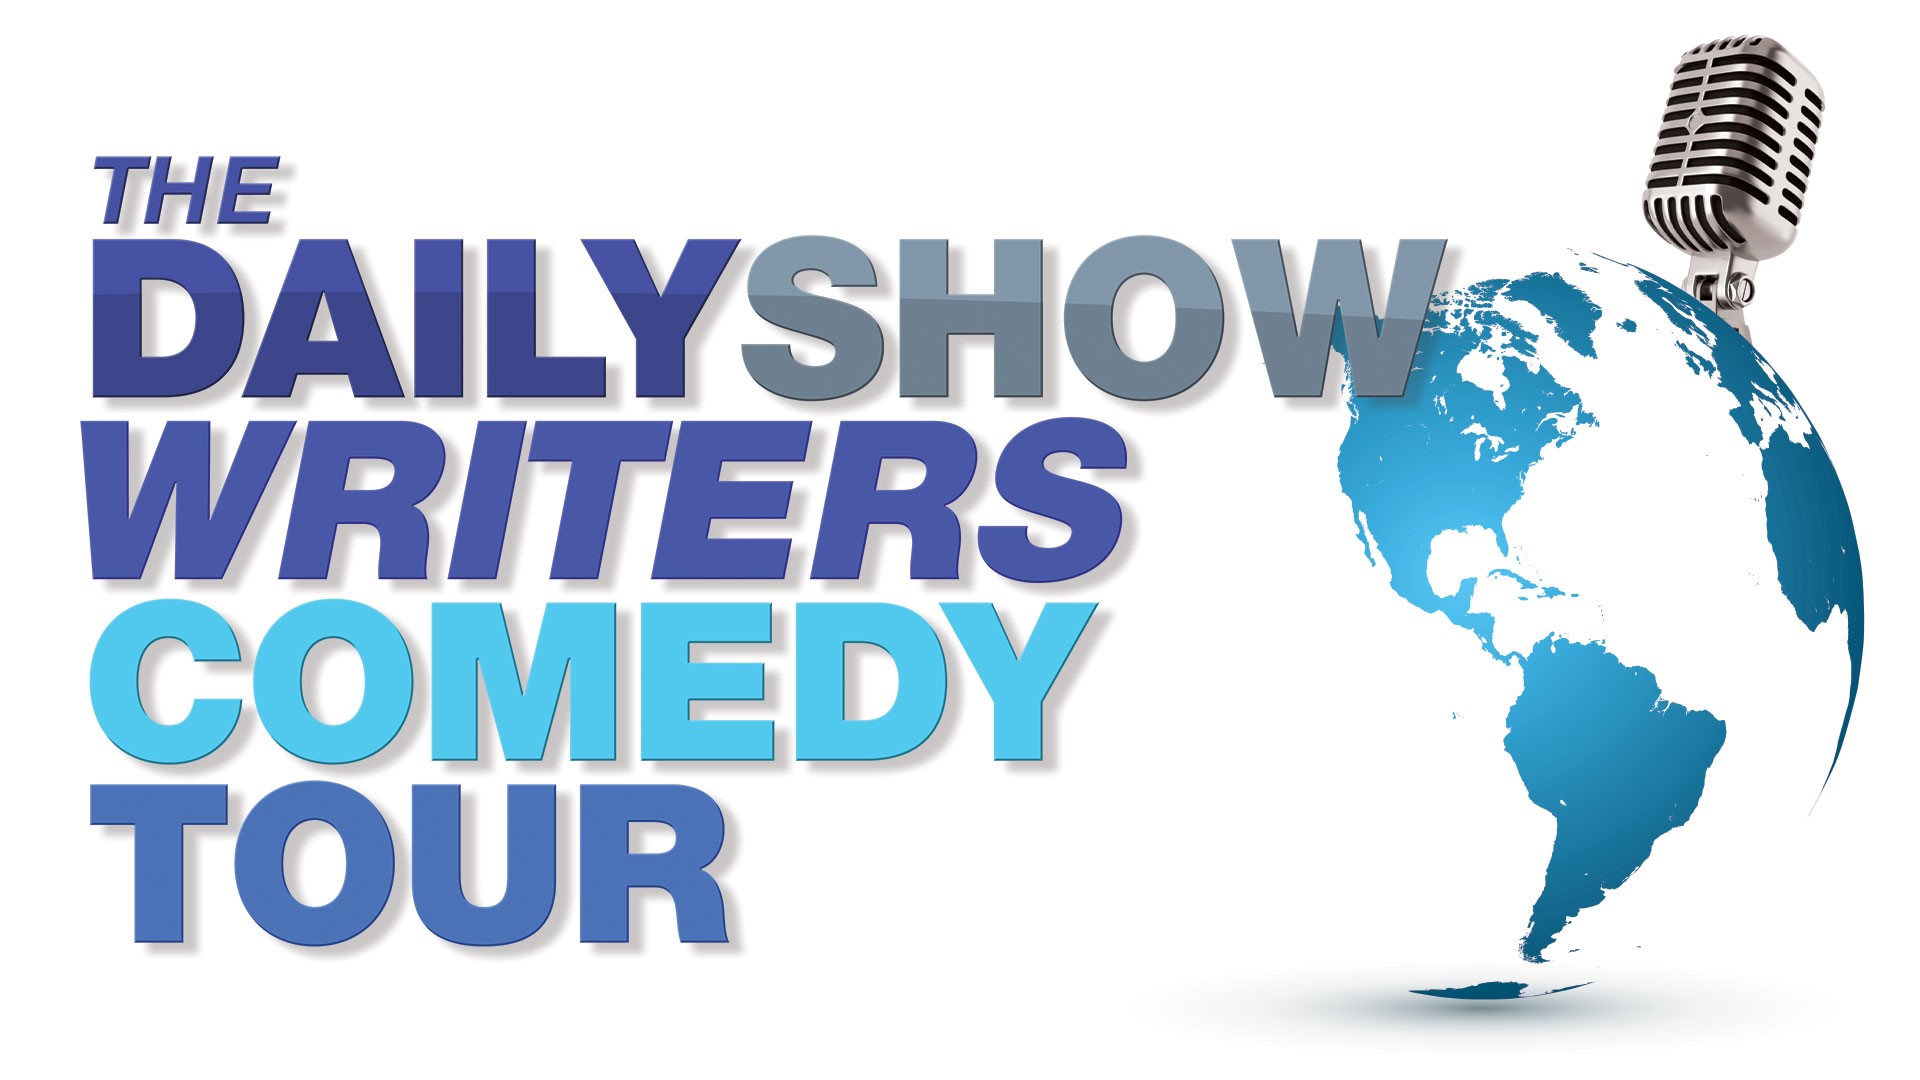 The Daily Show Writers Comedy Tour at the BCPA!